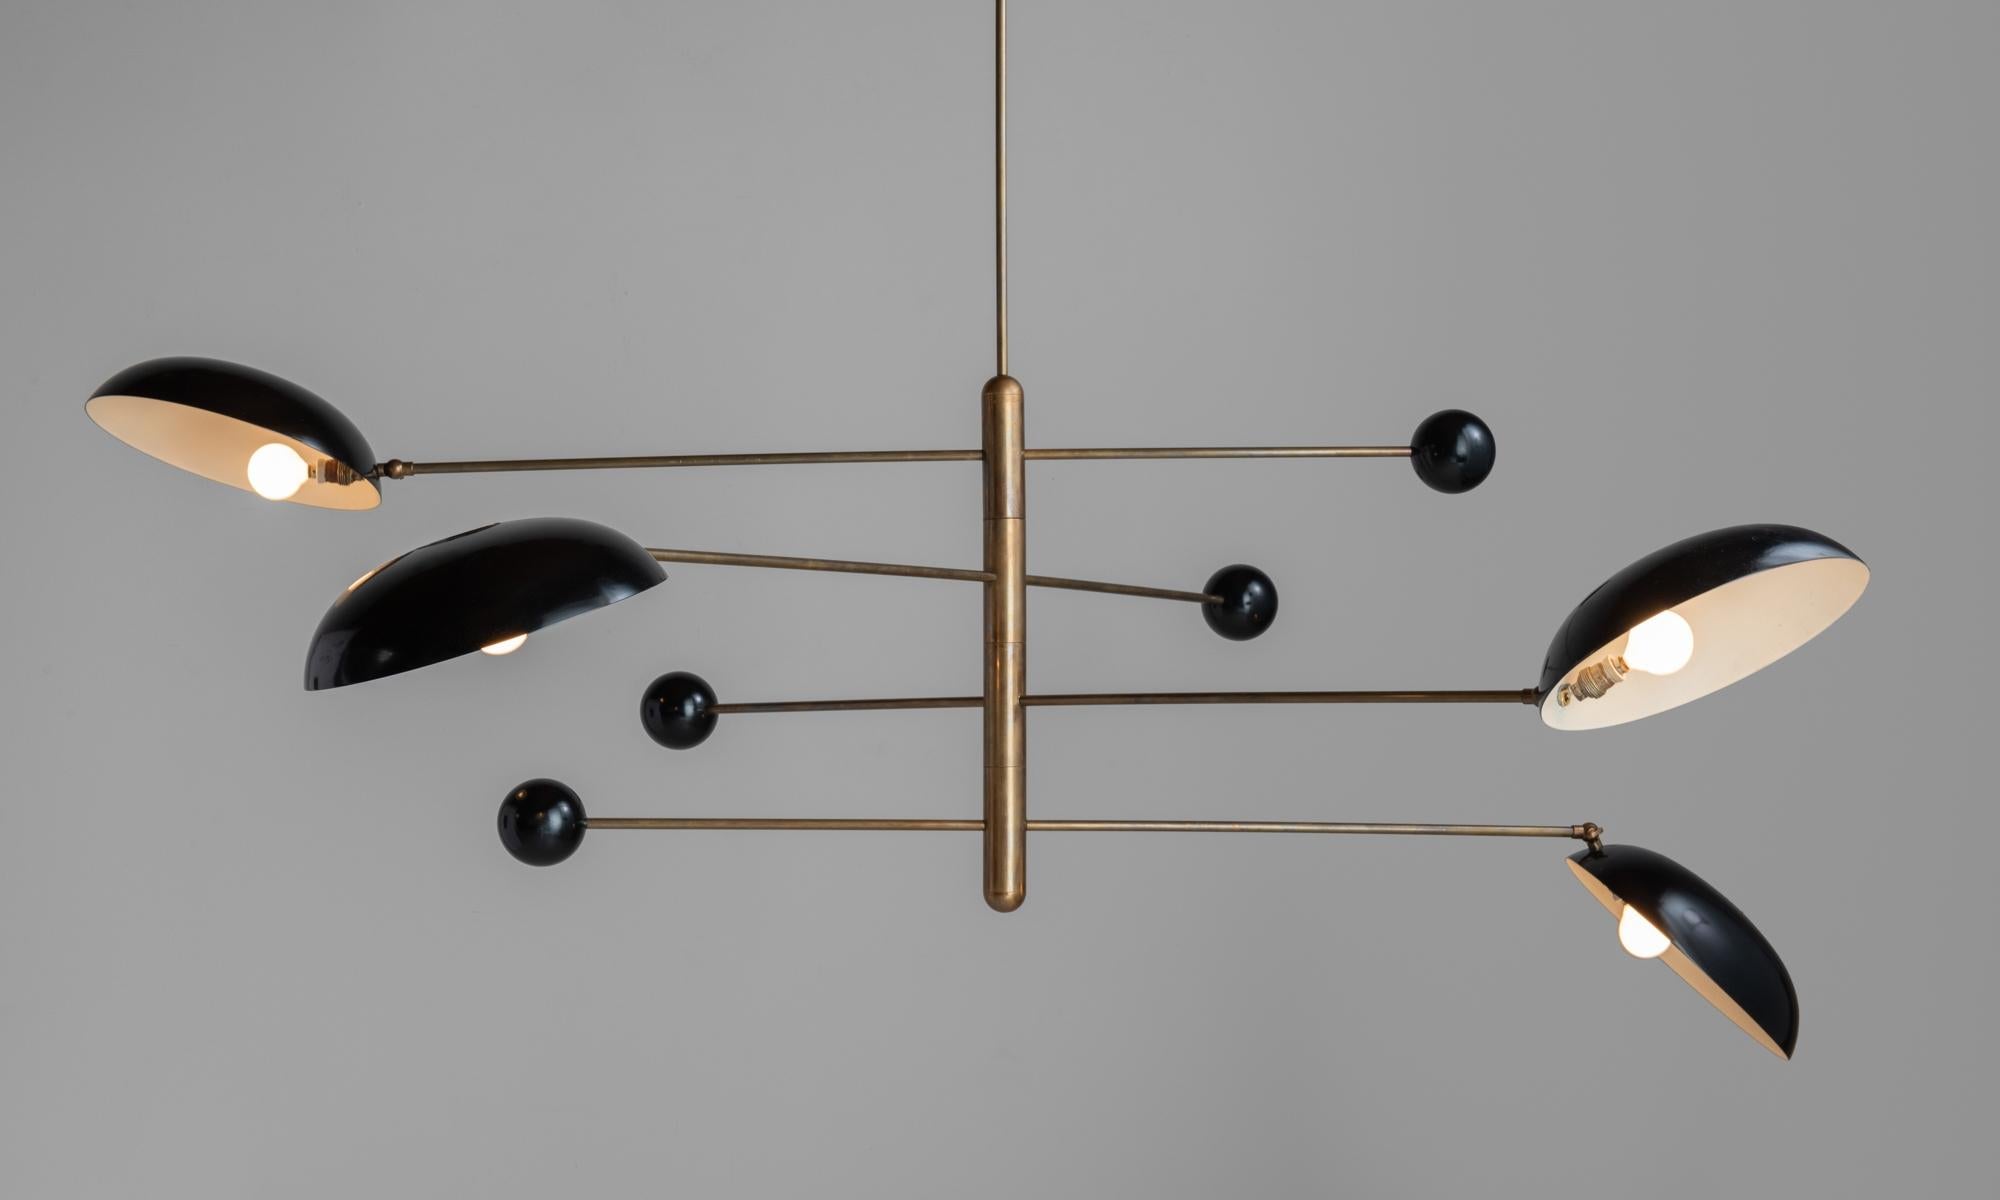 Modern counterbalance ceiling lamp, Italy, circa 1950

In the style of Stilnovo. Elegant form with (4) counterbalanced, adjustable lights with brass hardware.